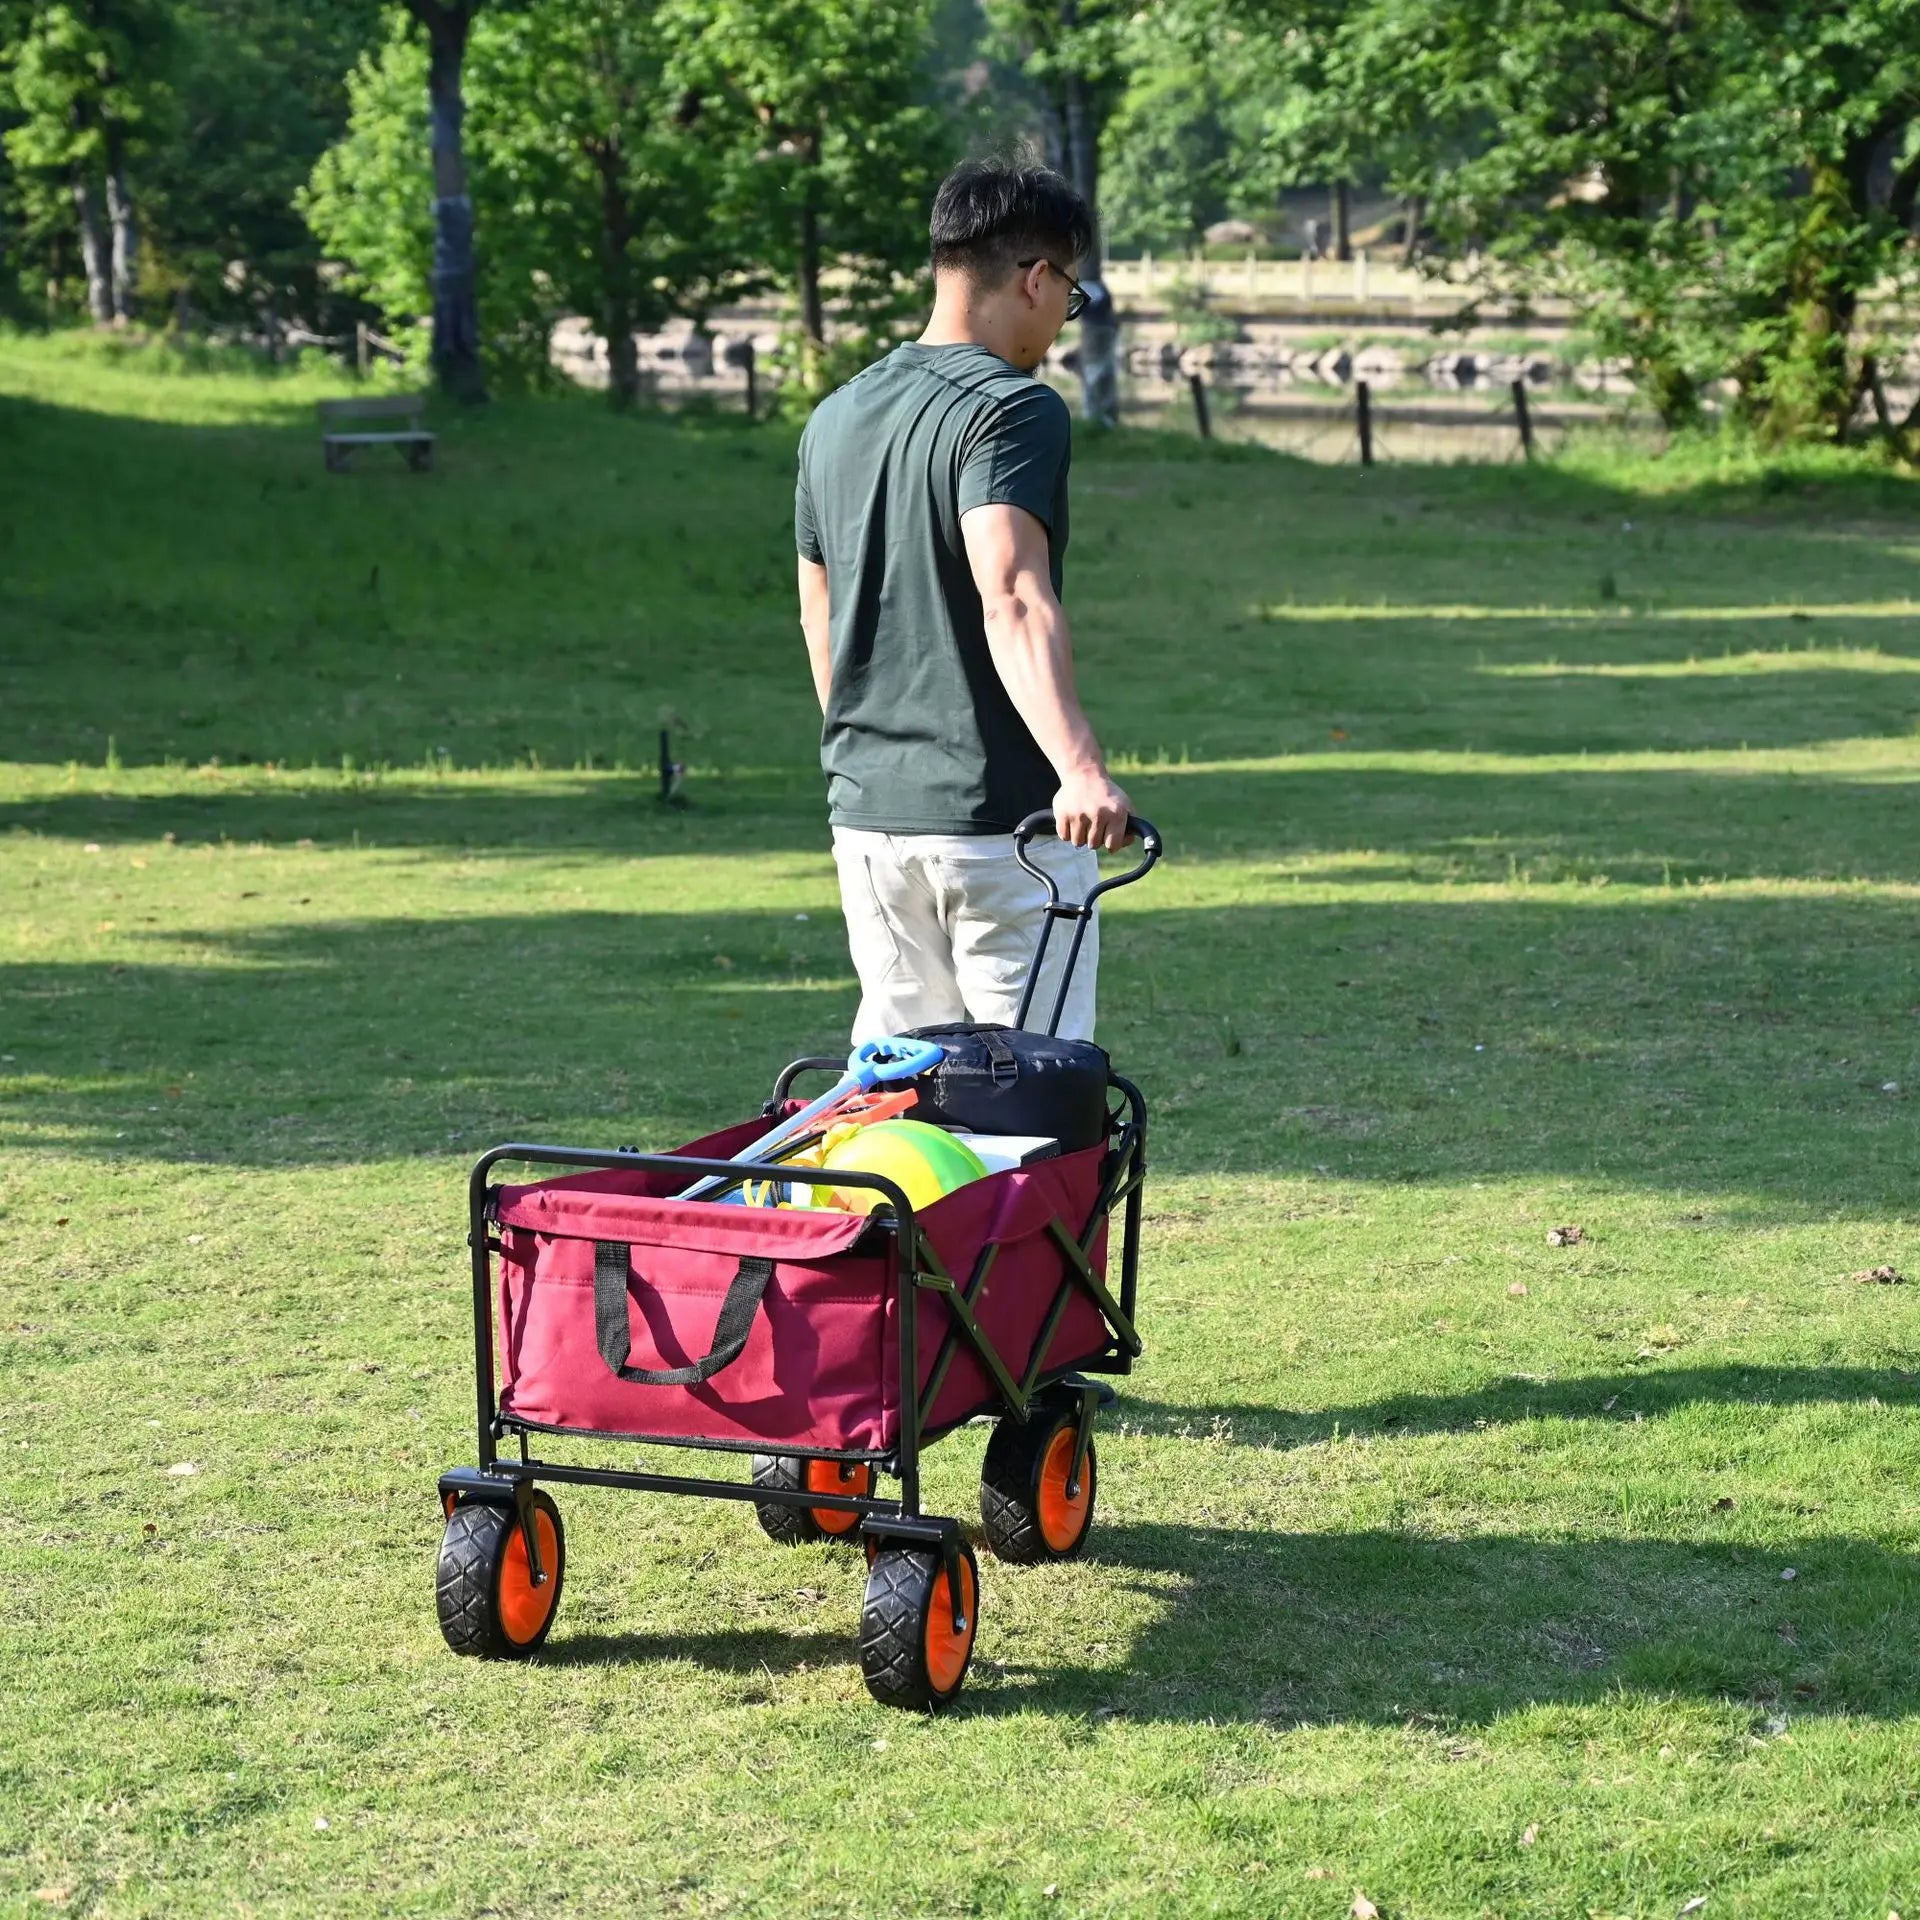 Outdoor Camp Car Home Shopping Cart Portable Foldable Trolley Camping Car 7 Inch Pull Goods Stall Trolley